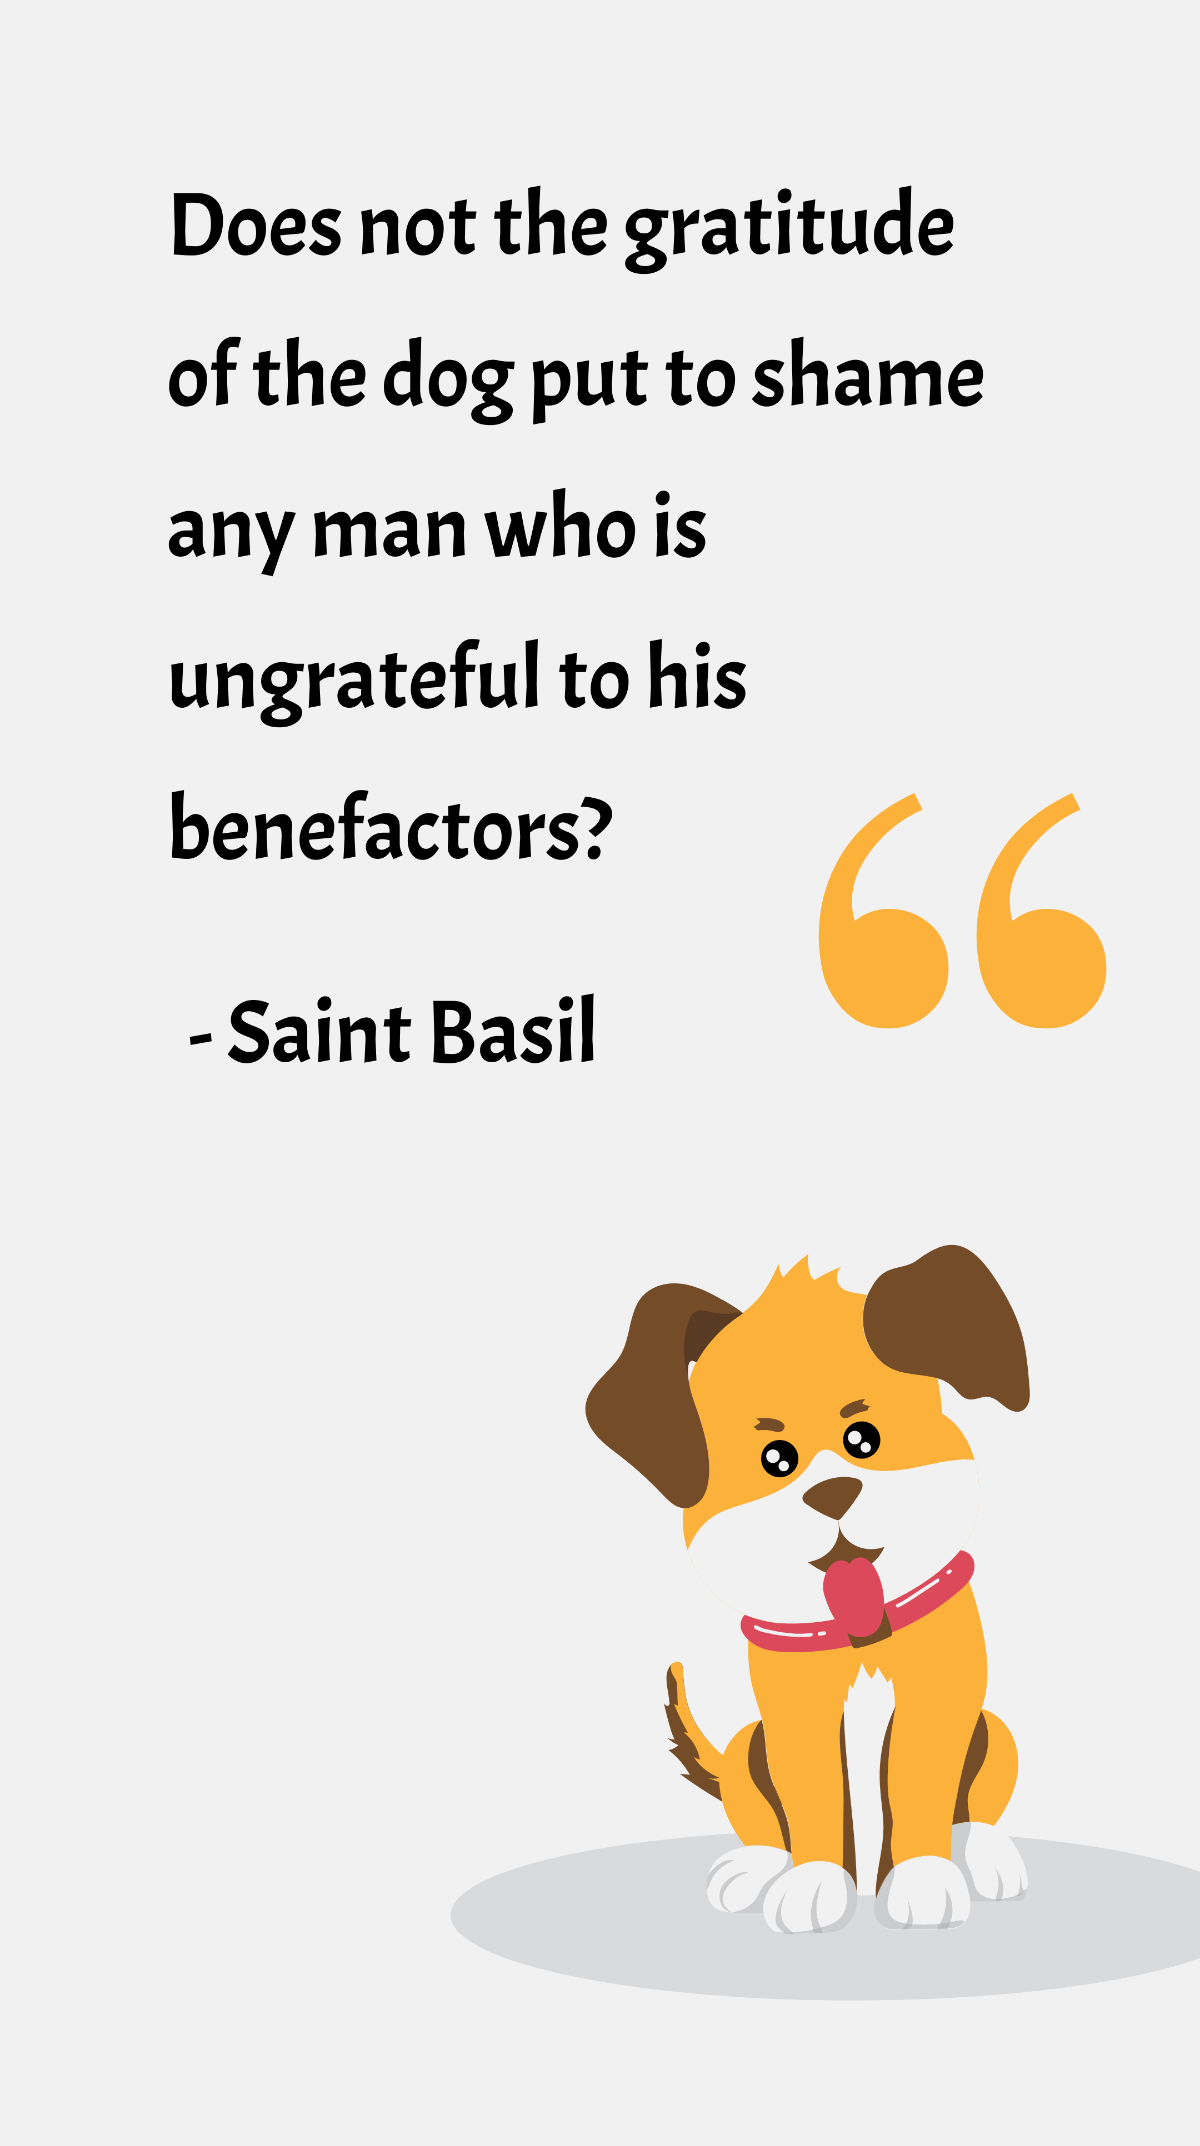 Free Saint Basil - Does not the gratitude of the dog put to shame any man who is ungrateful to his benefactors? Template